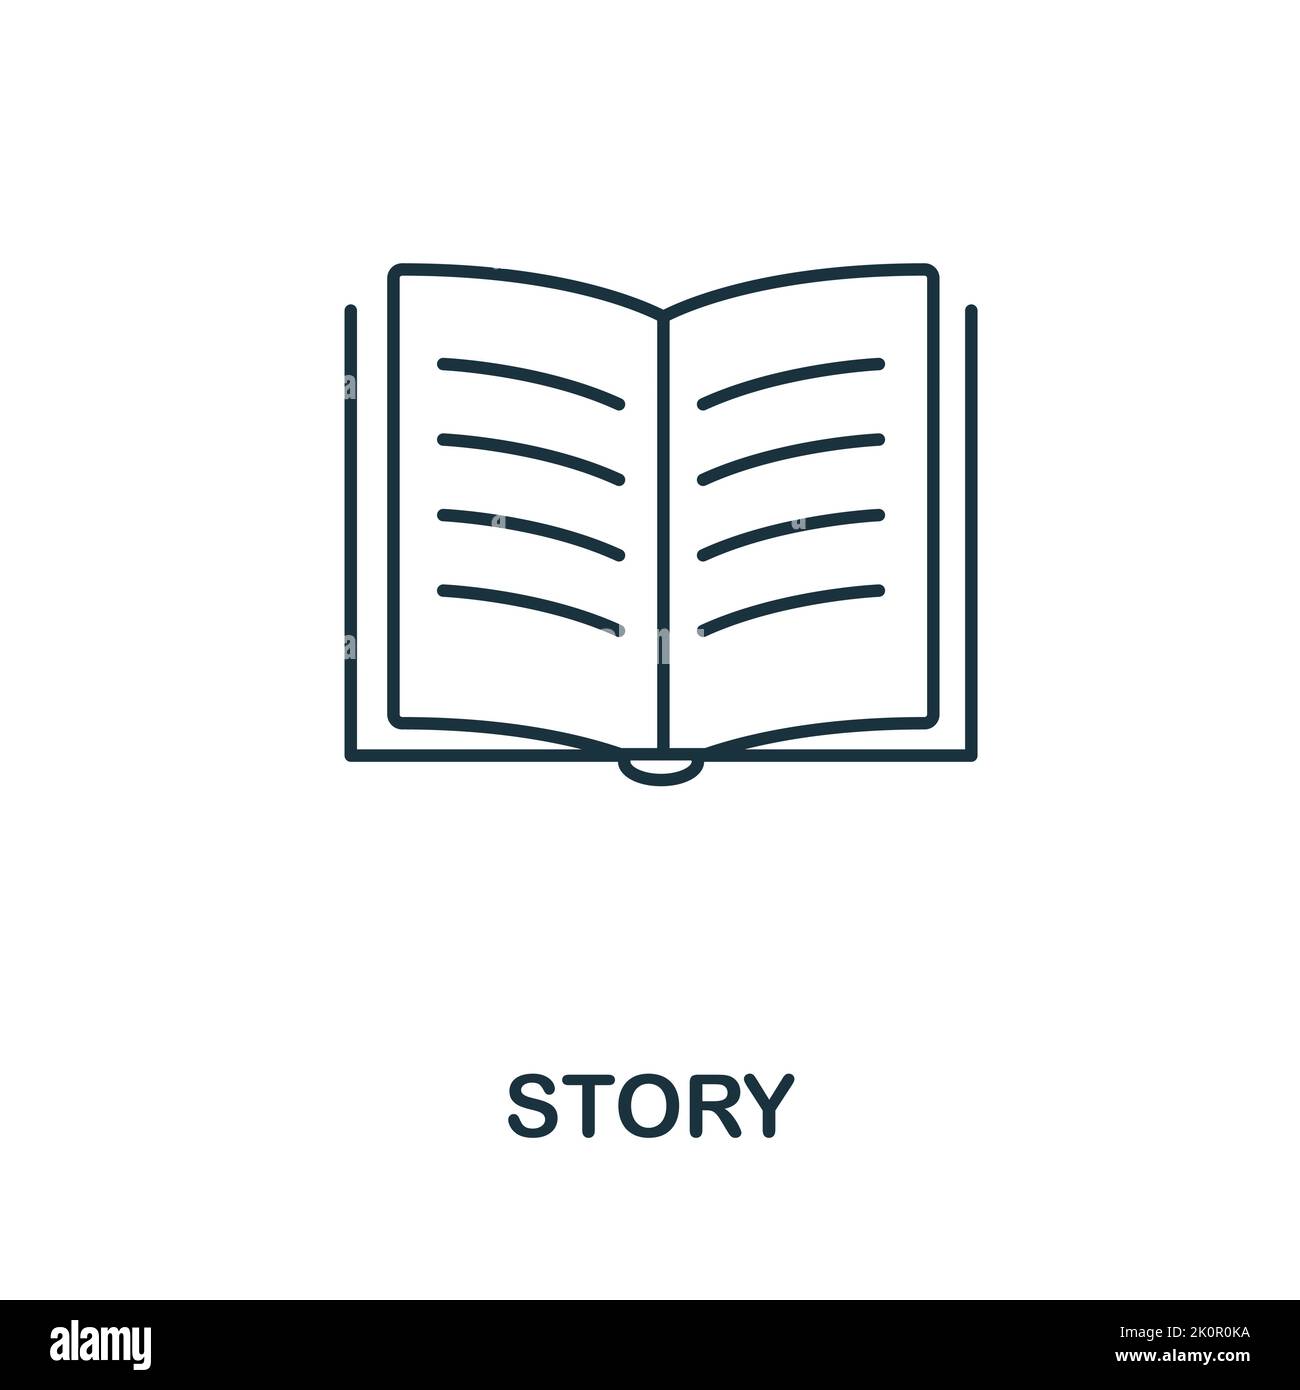 Story icon. Creative element sign from agile method collection. Monochrome Story icon for templates, infographics and more. Stock Vector